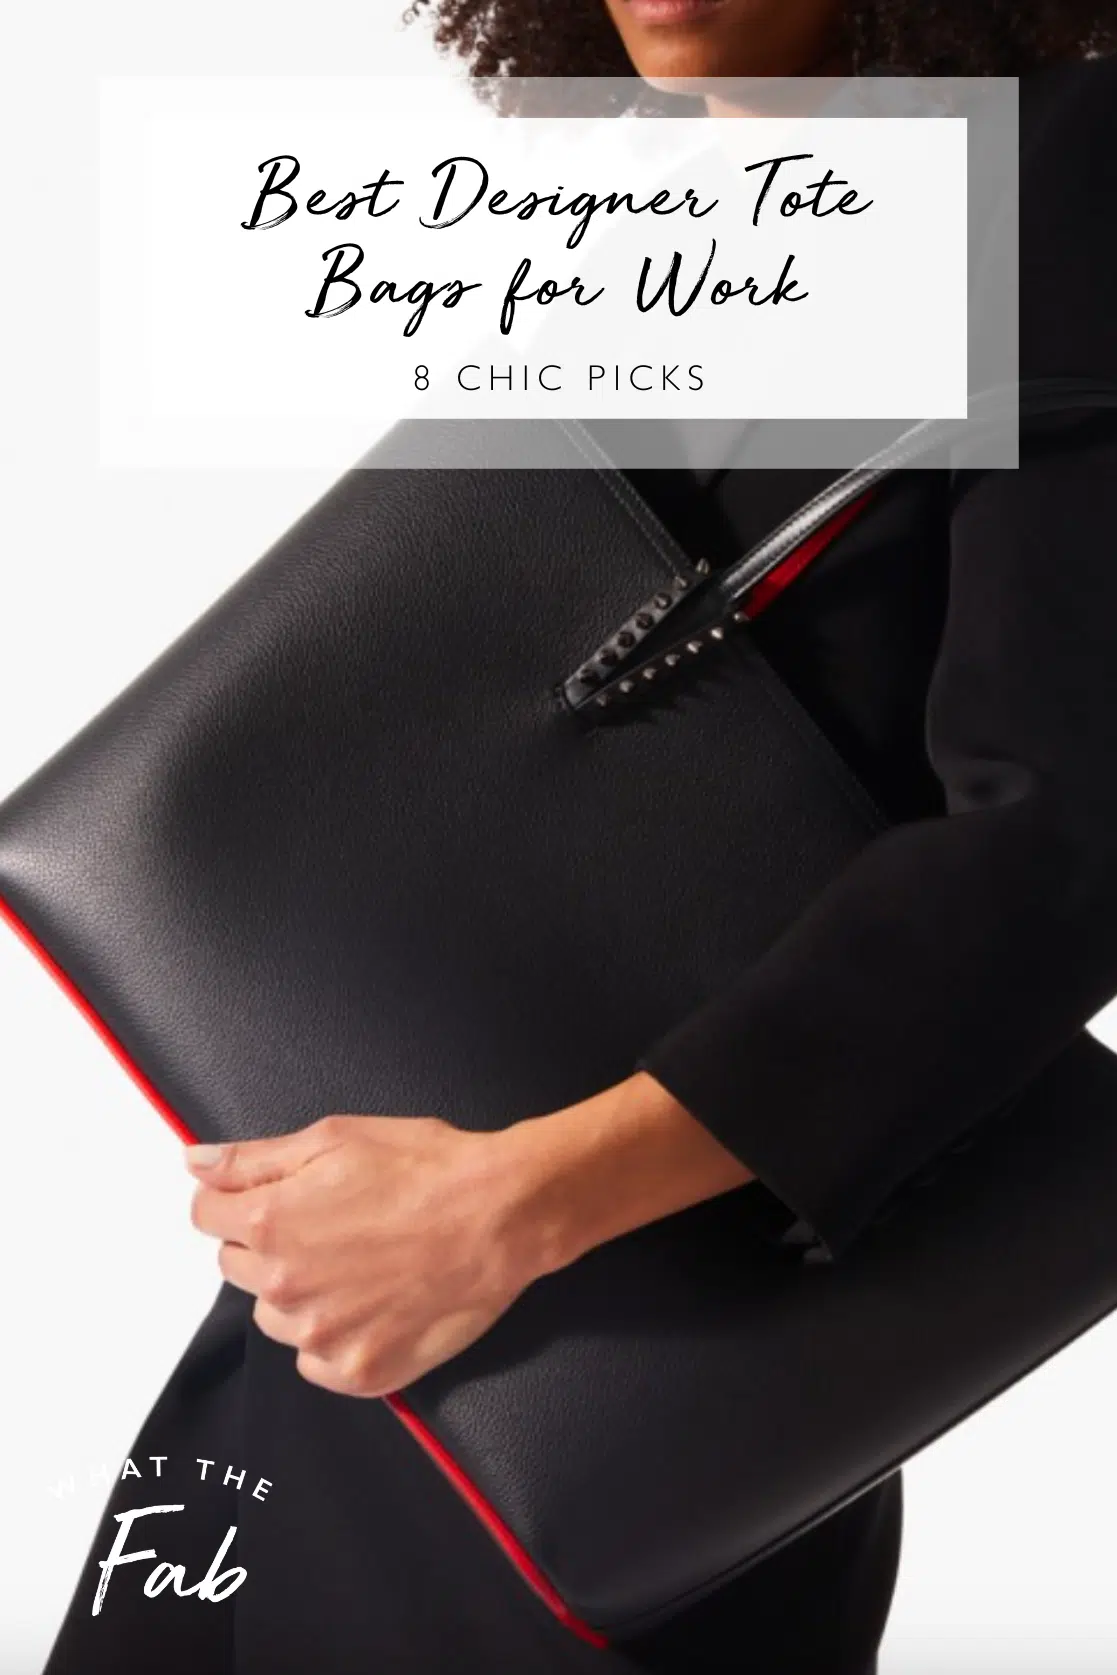 Styling A Black Bag. Is It Really That Easy? - The Fashion Tag Blog